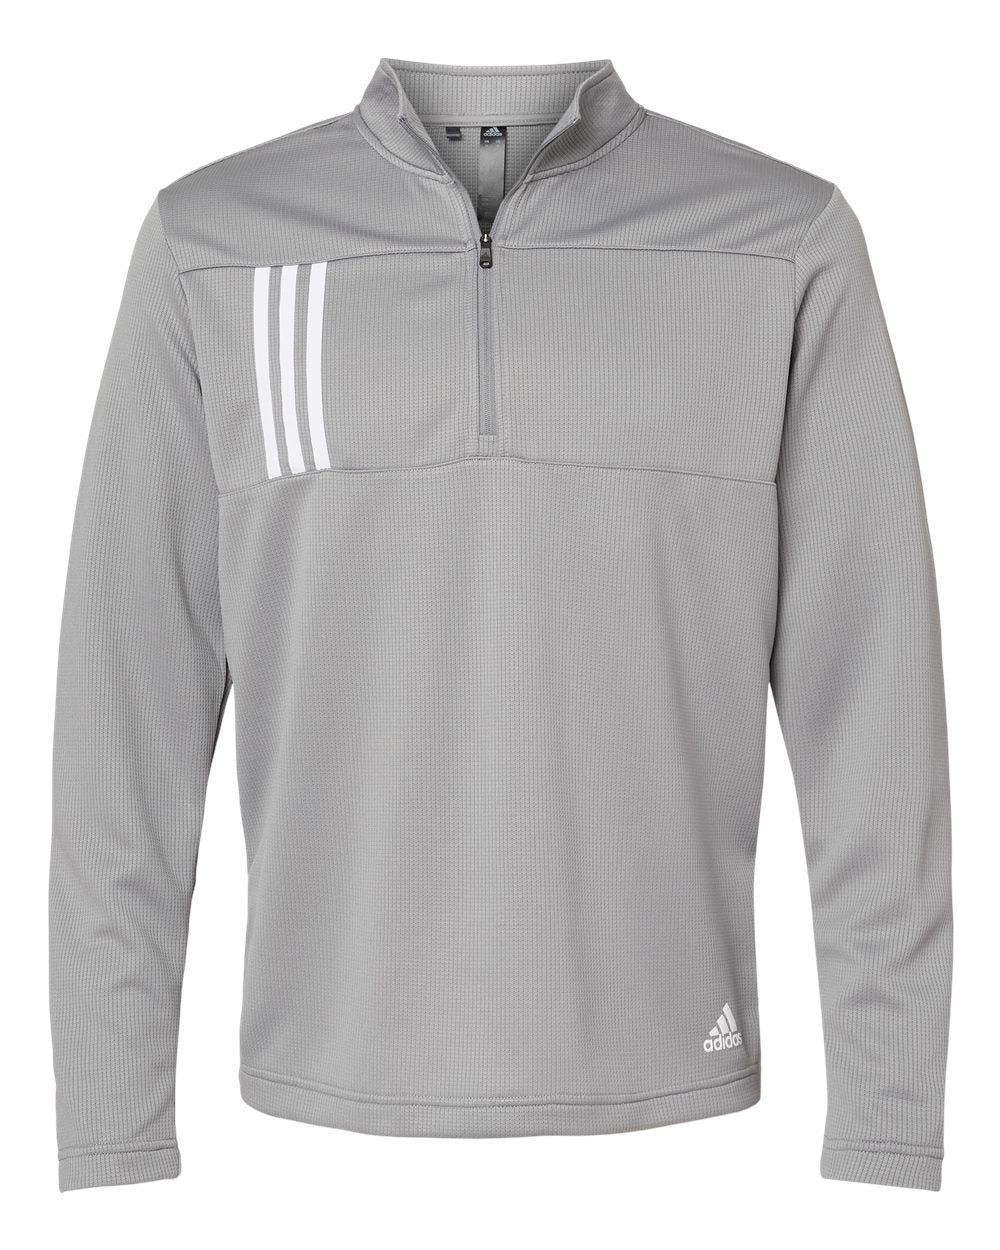 Adidas 3-Stripes Double Knit Quarter Zip Pullover